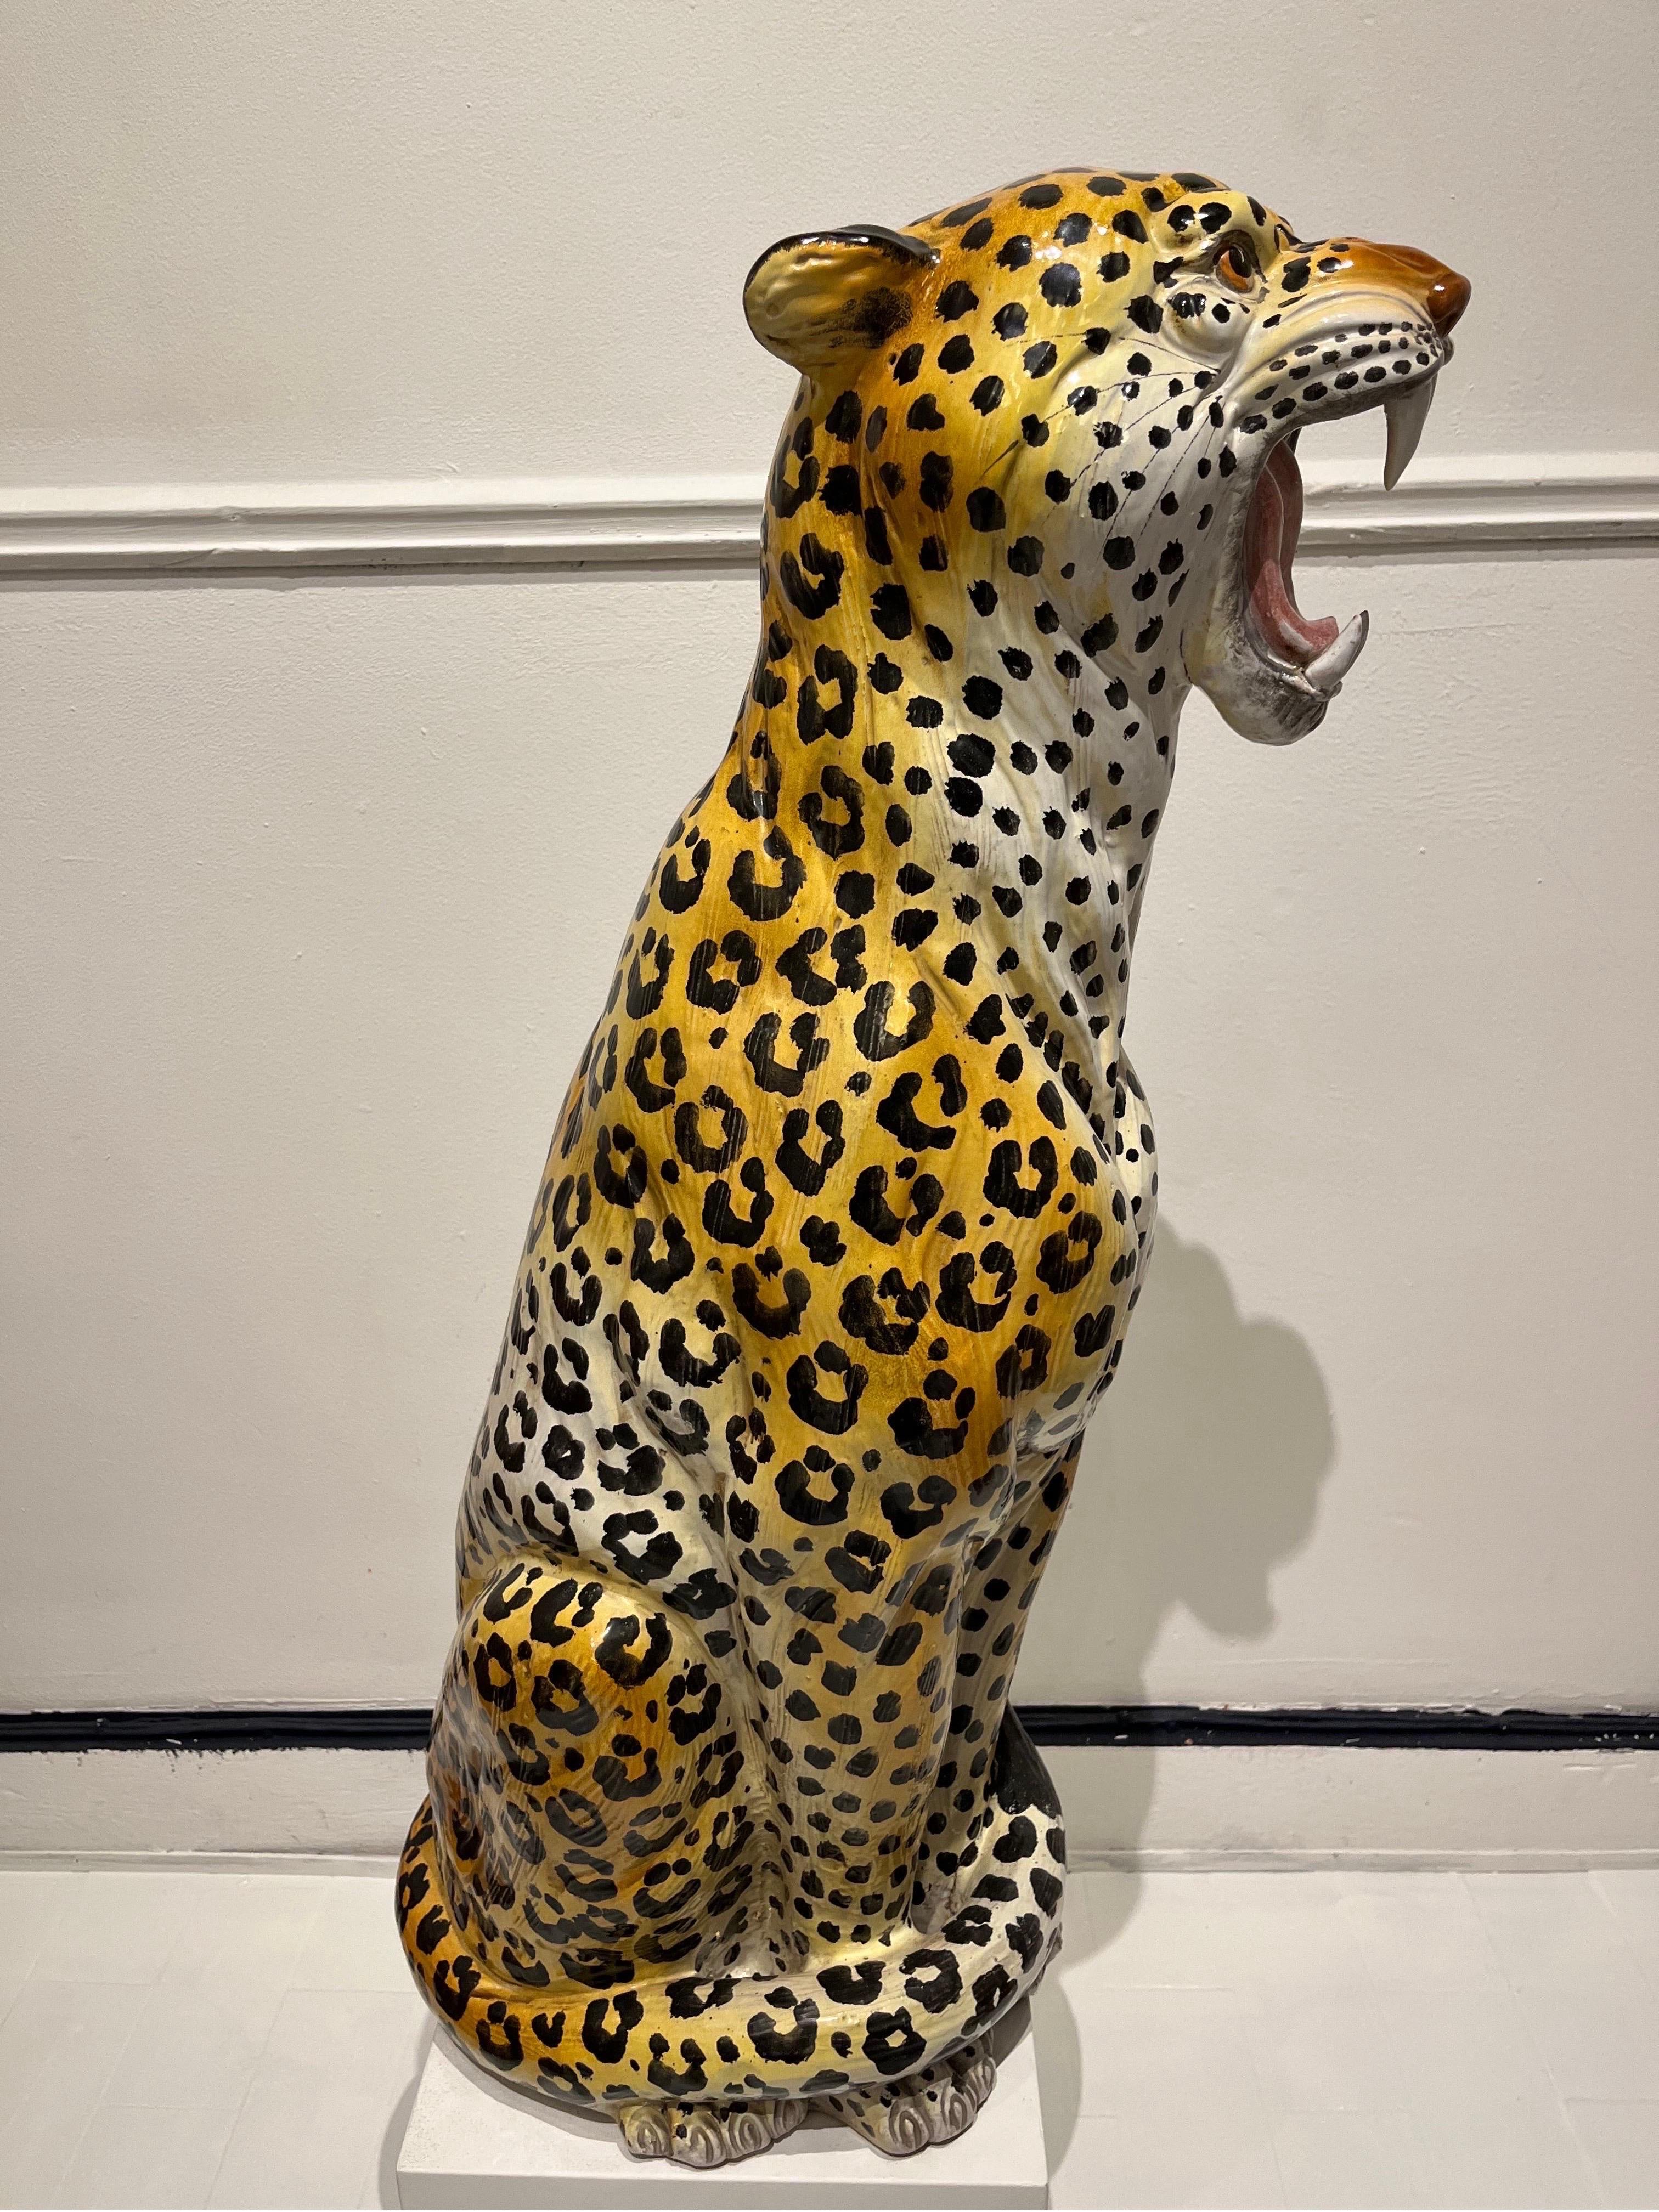 This type of Terracotta sculpture representing a tiger was popular in the 1970s. It appreciated for their wild life and decorative quality. The Leopard like any feline was particularly appreciated as a decorative object because of its beautiful fur.